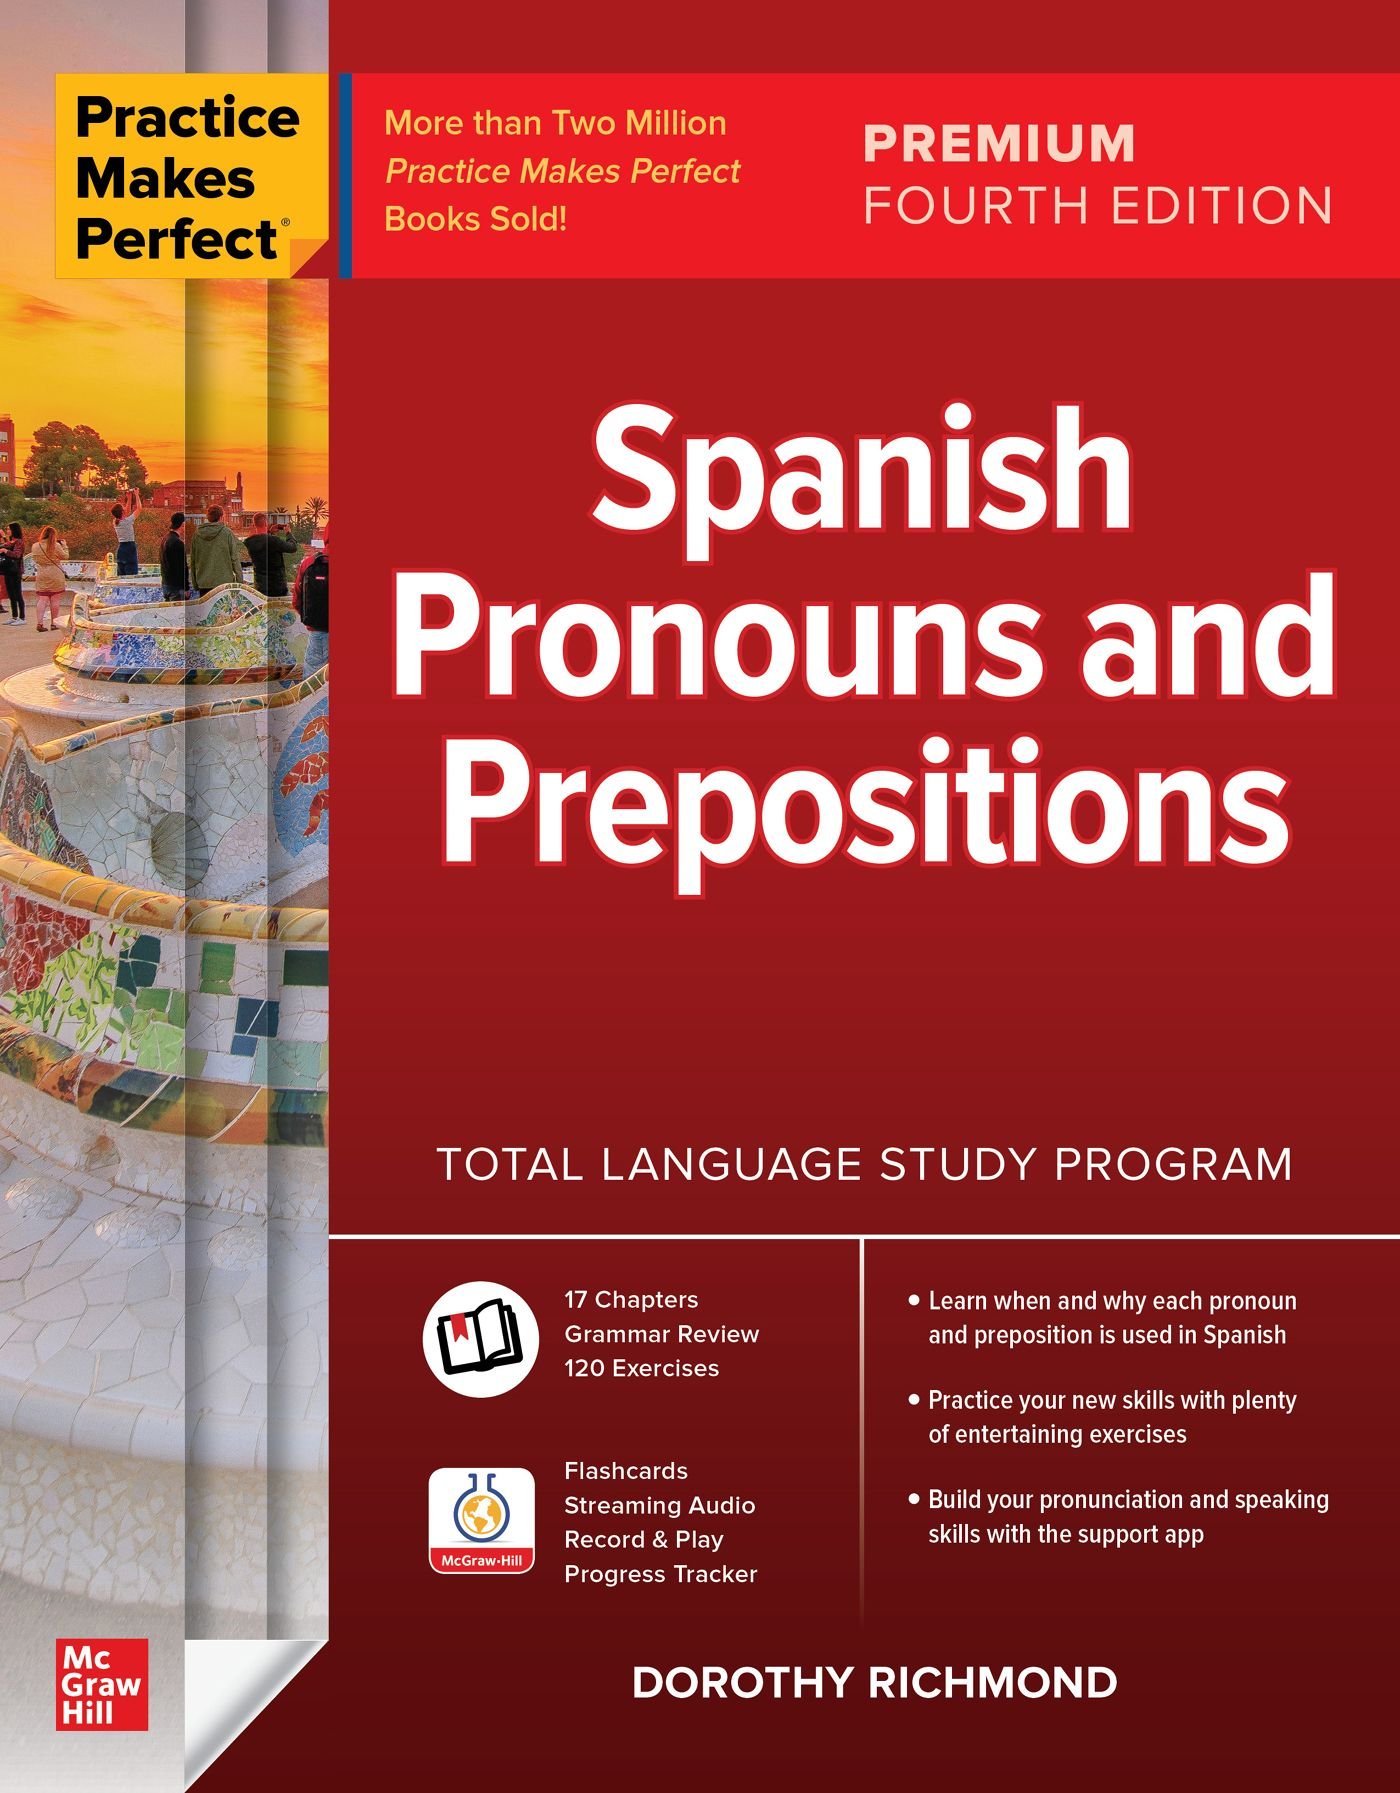 Download Practice Makes Perfect Spanish Pronouns And Prepositions 4th Premium Edition